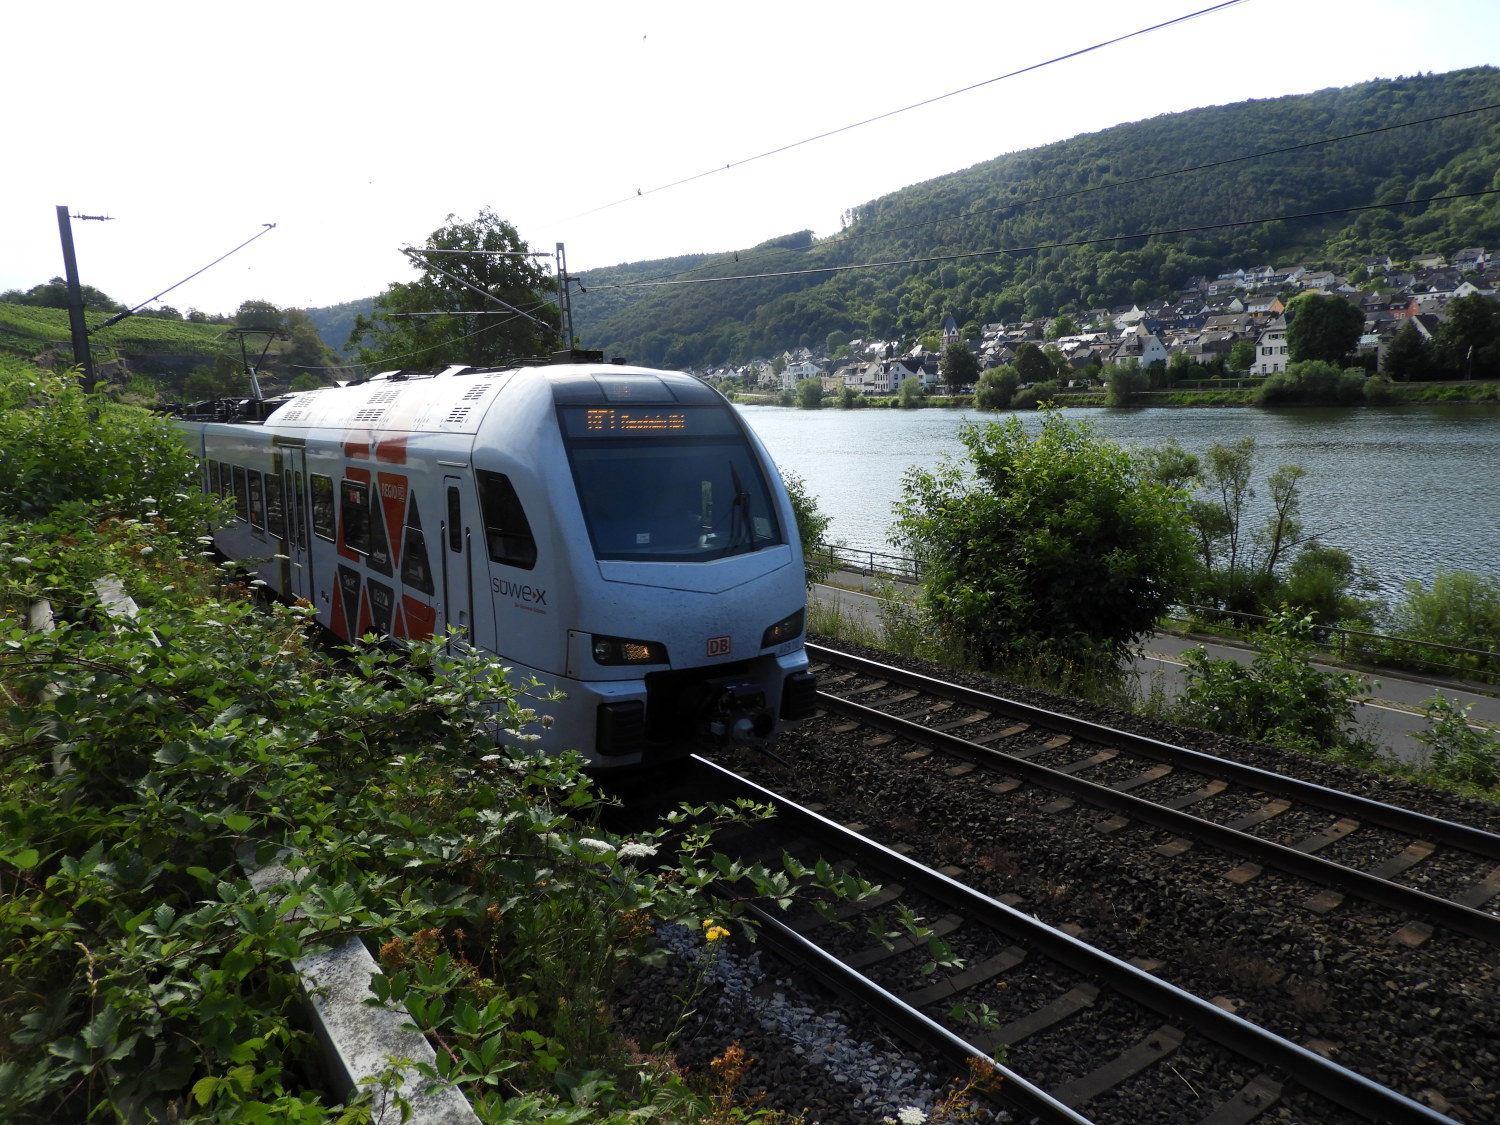 The Mosel Express